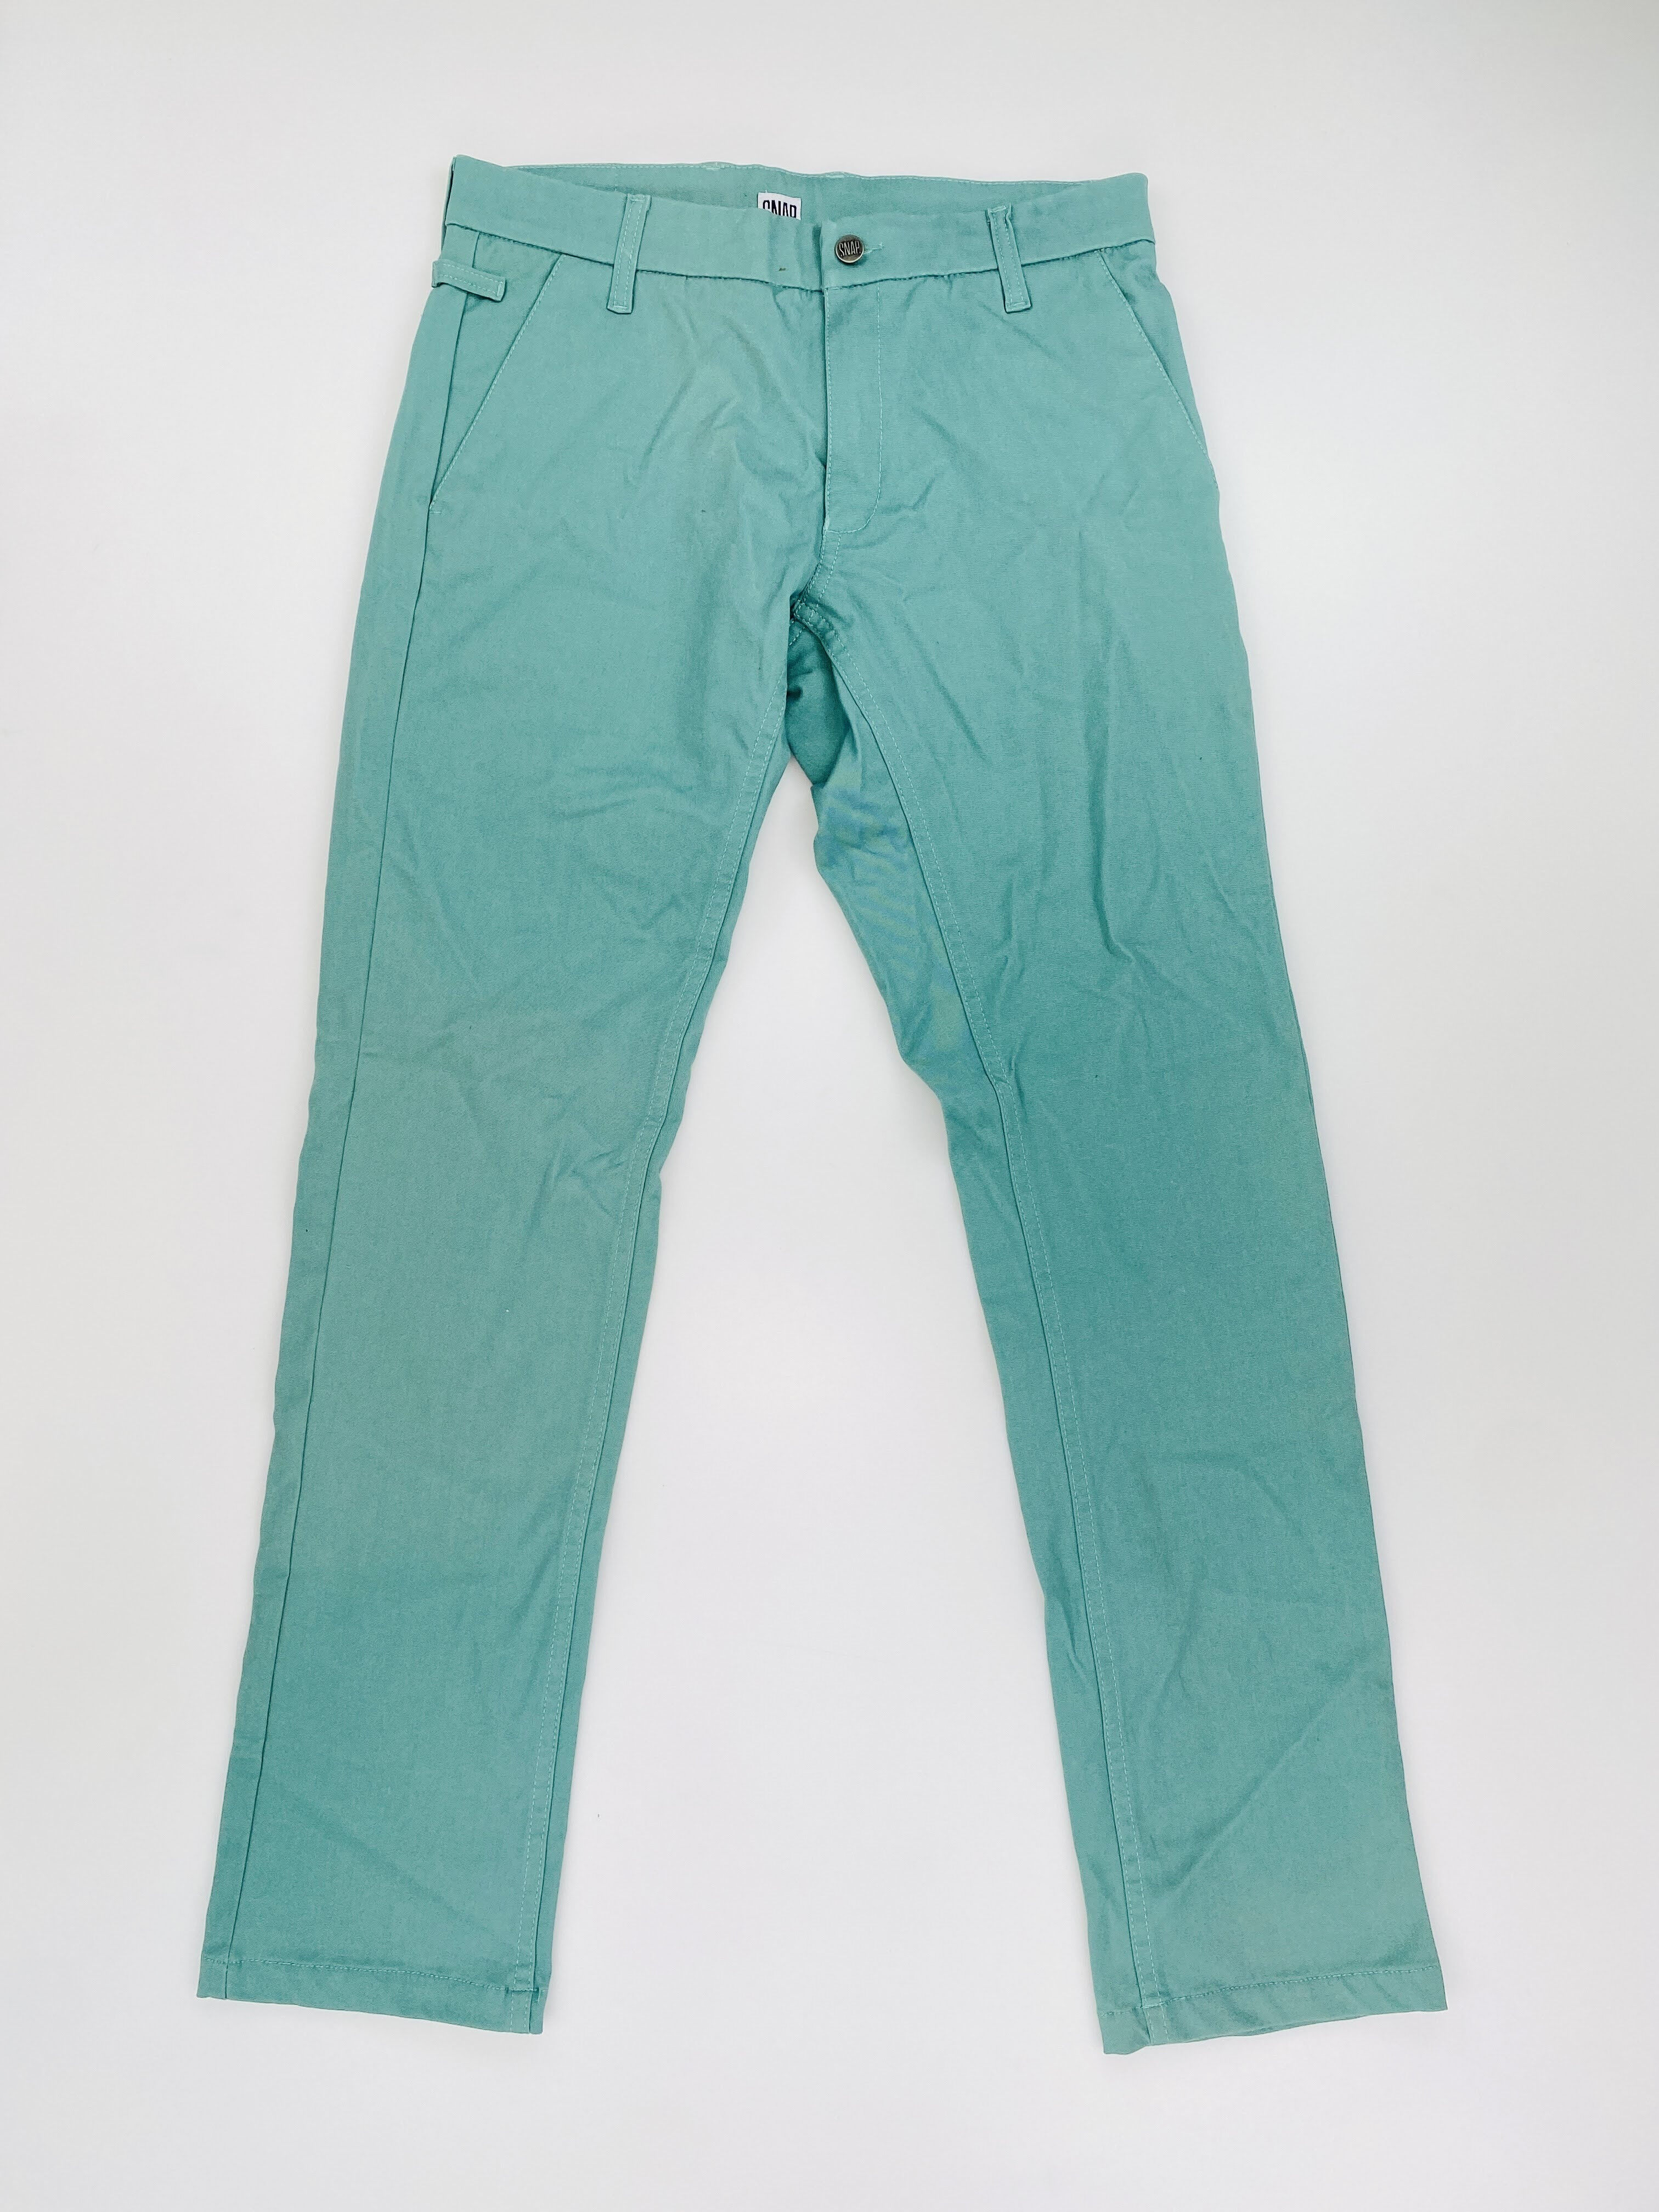 Snap Chino - Second Hand Trousers - Men's - Green - S | Hardloop